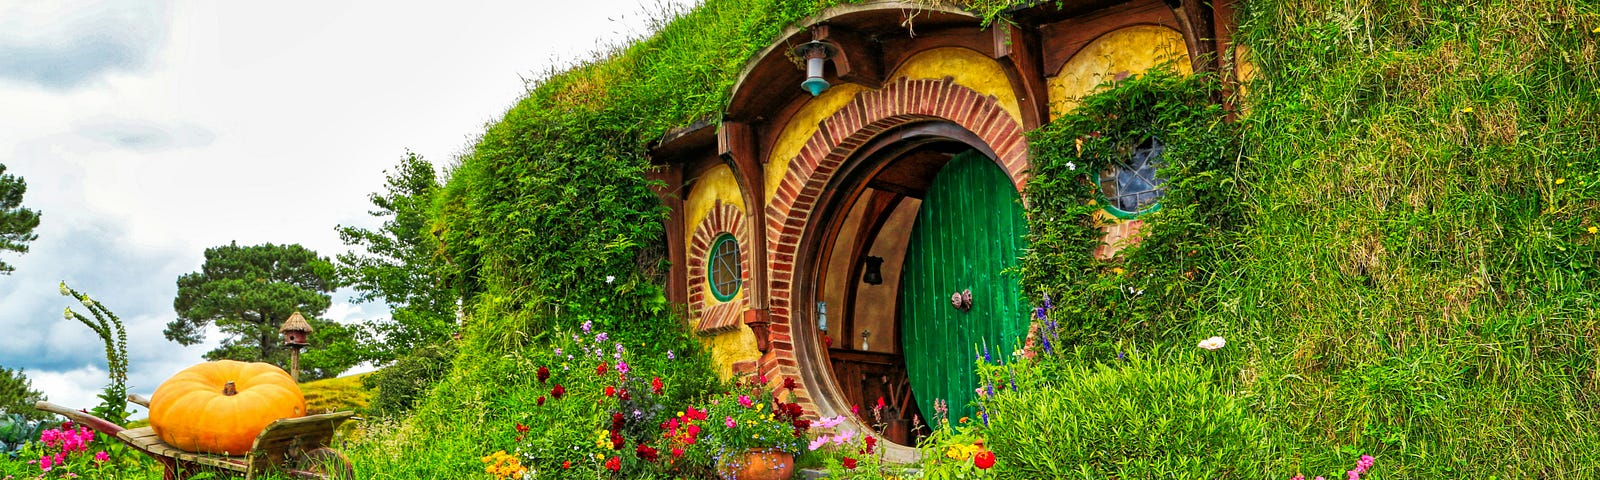 The Hobbit Hole, something to celebrate on national Tolkien Reading Day!